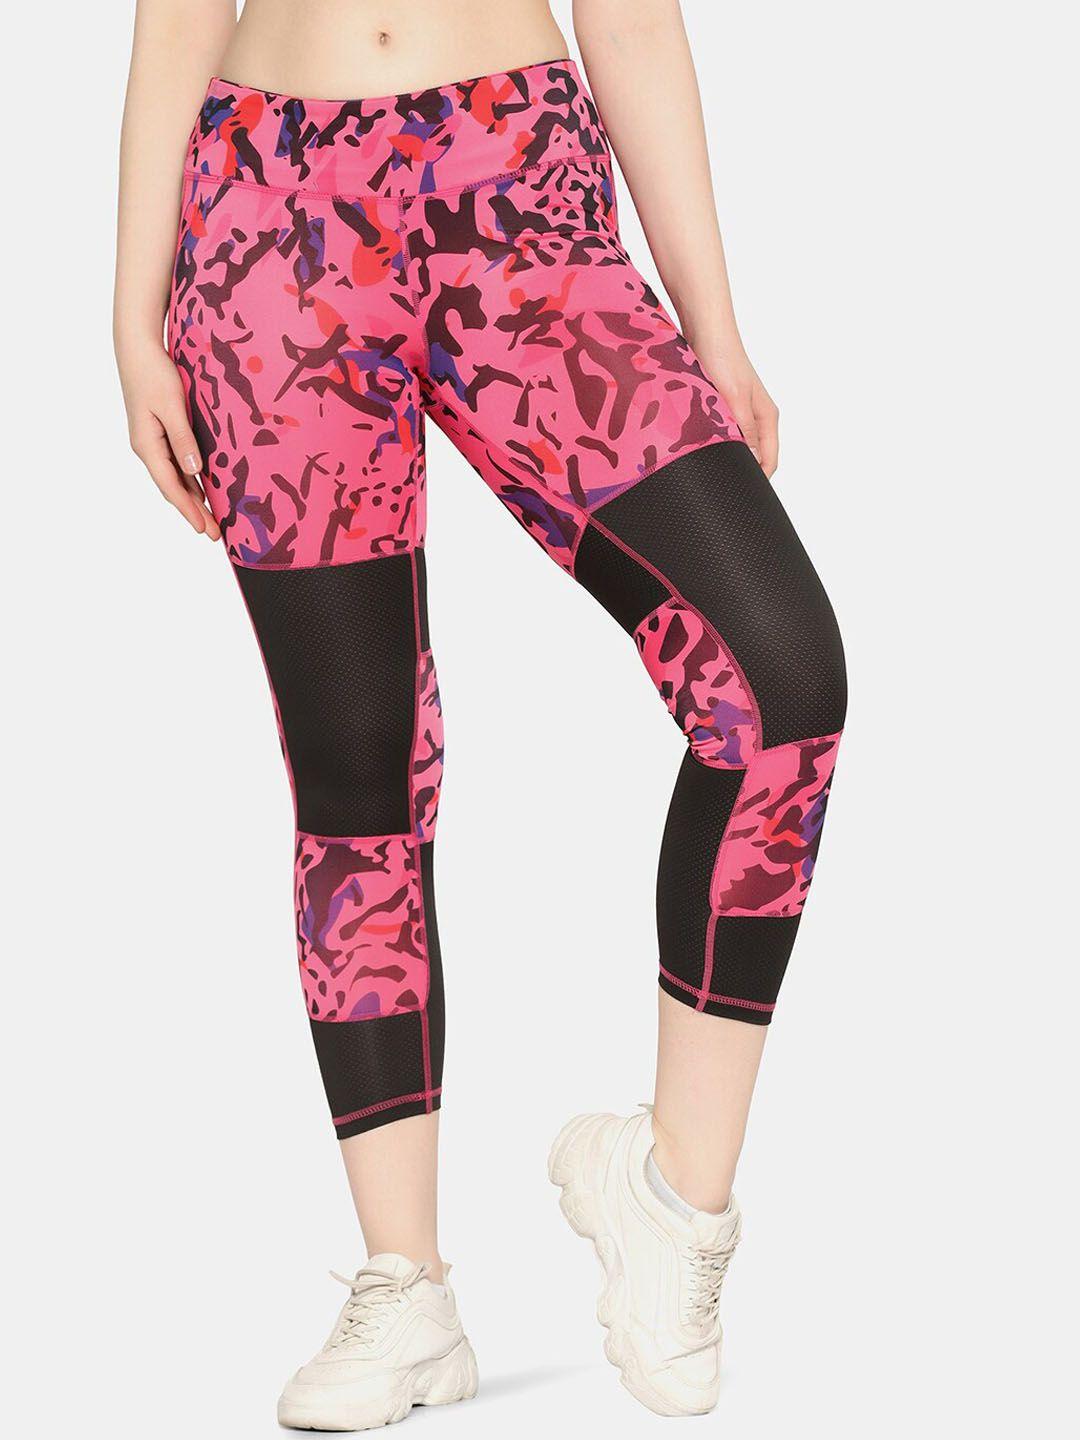 da intimo women printed ankle-length sports tights